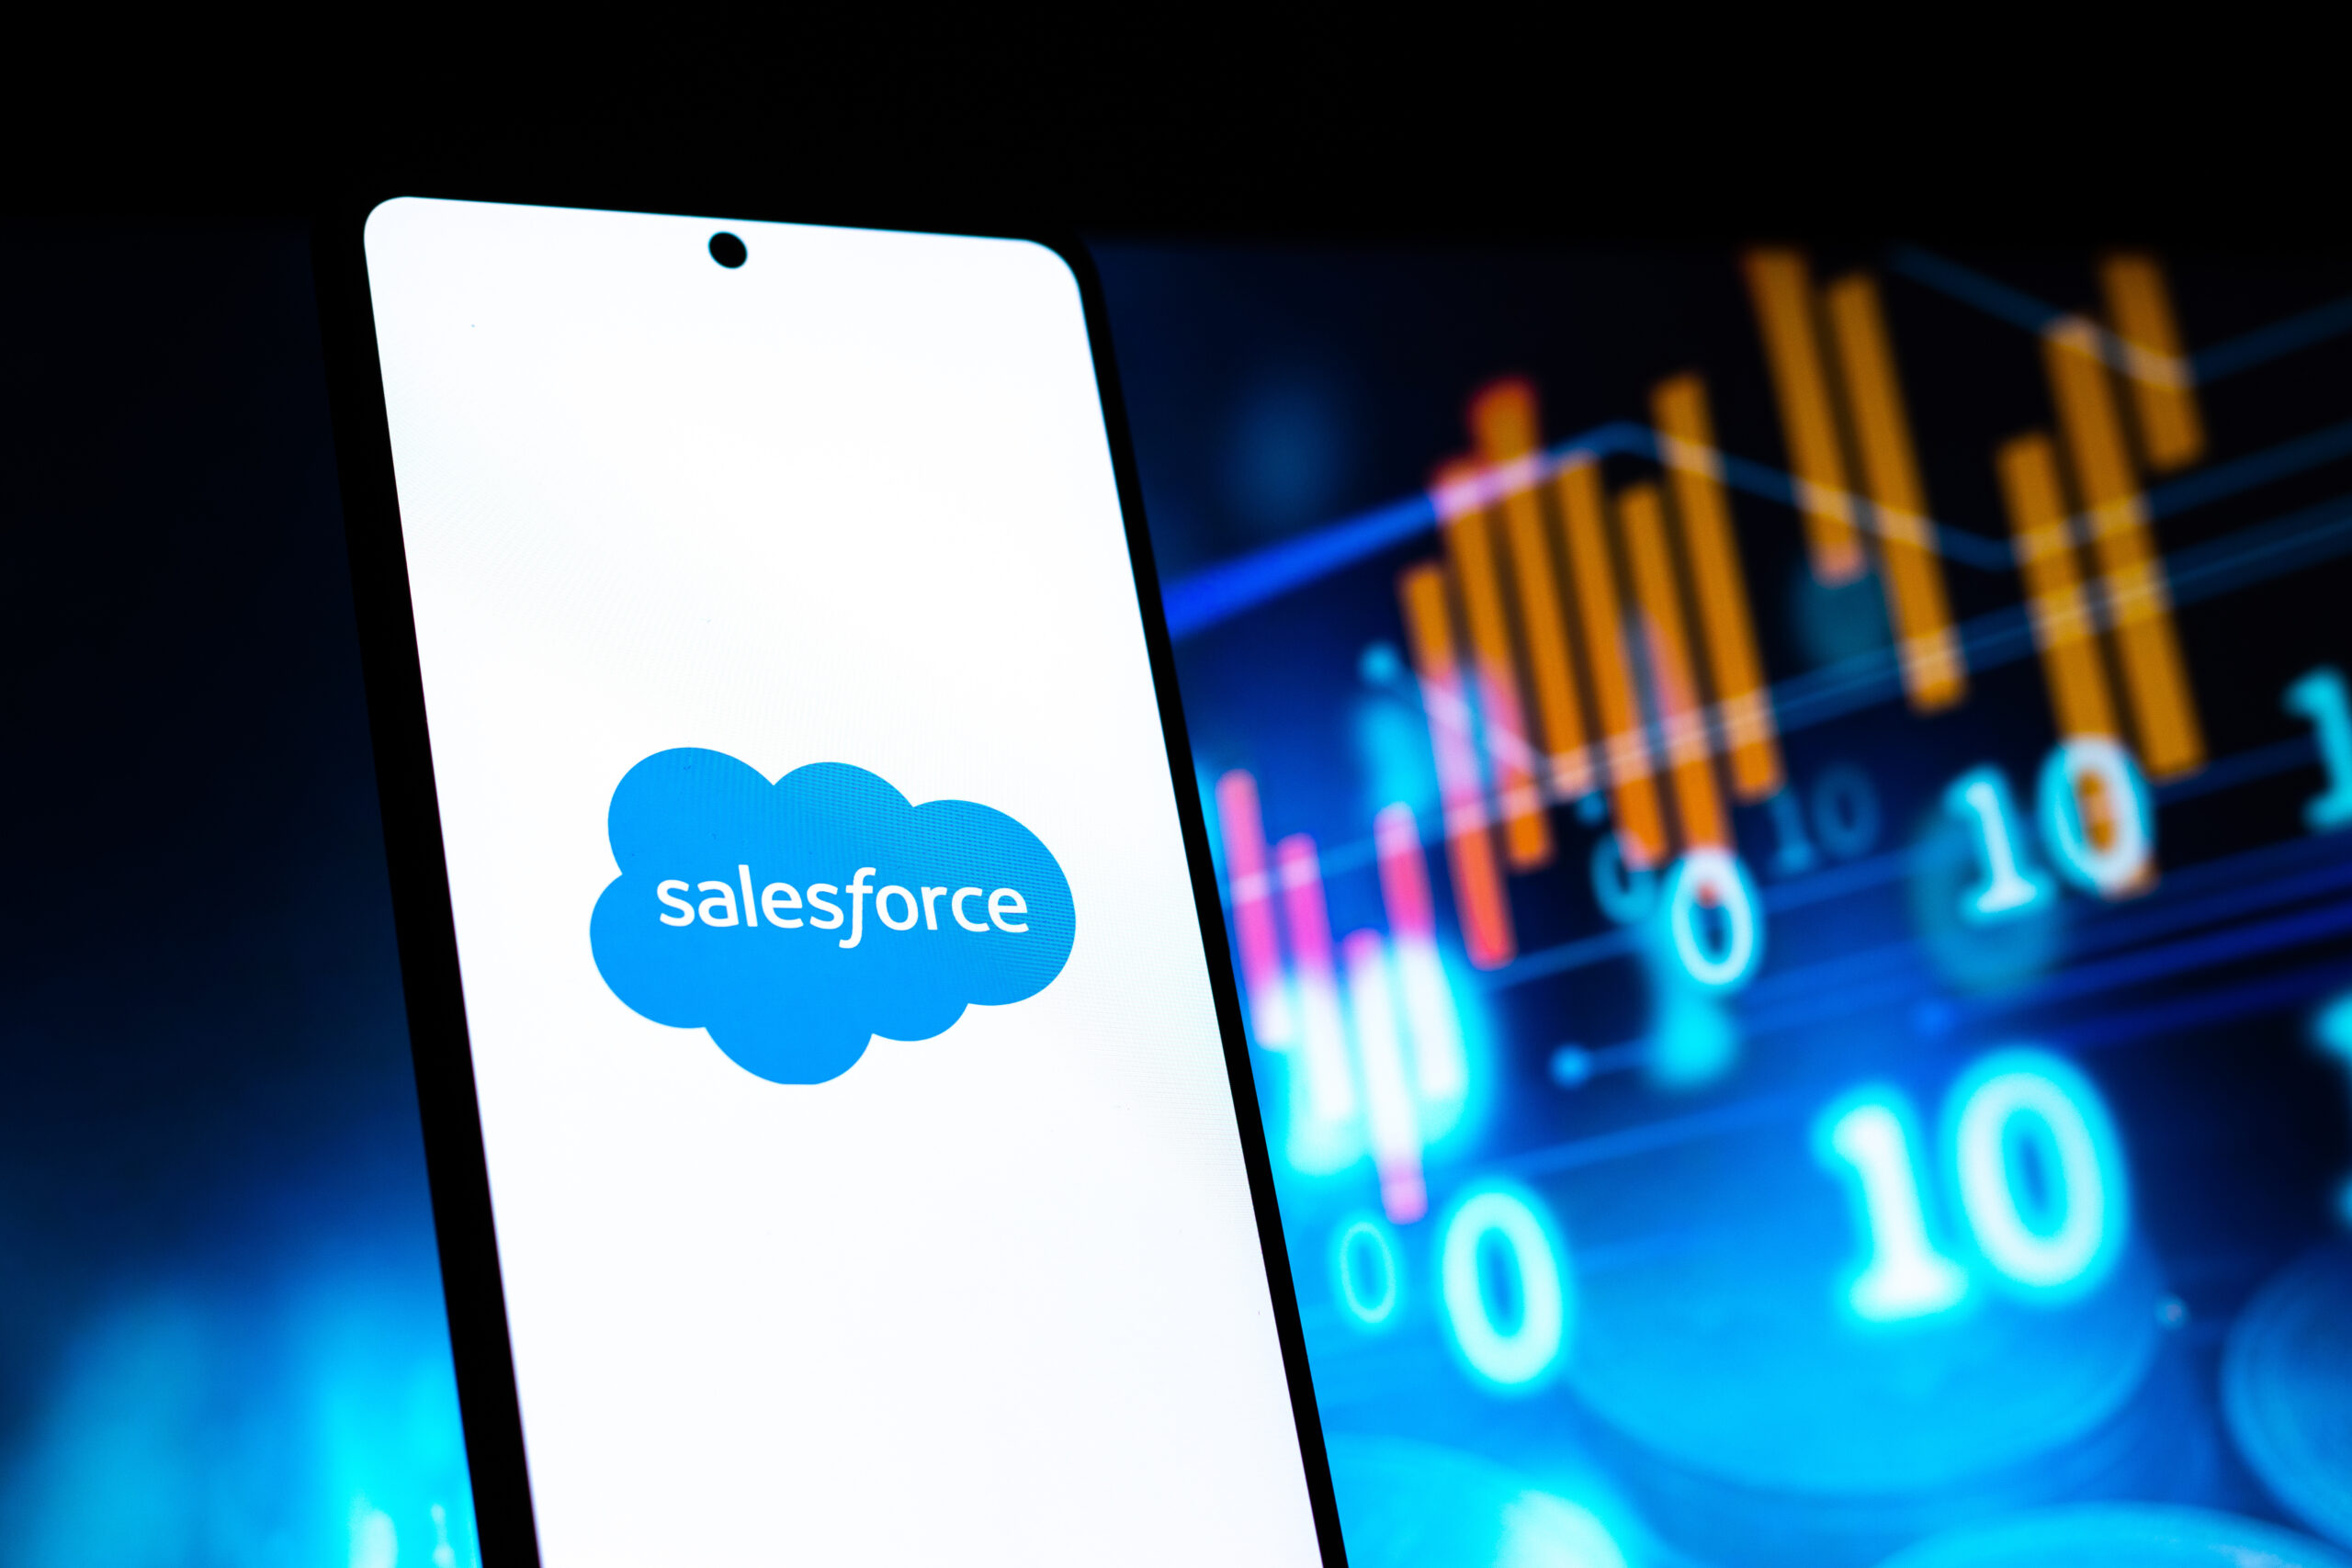 Managed Services - Salesforce on phone screen